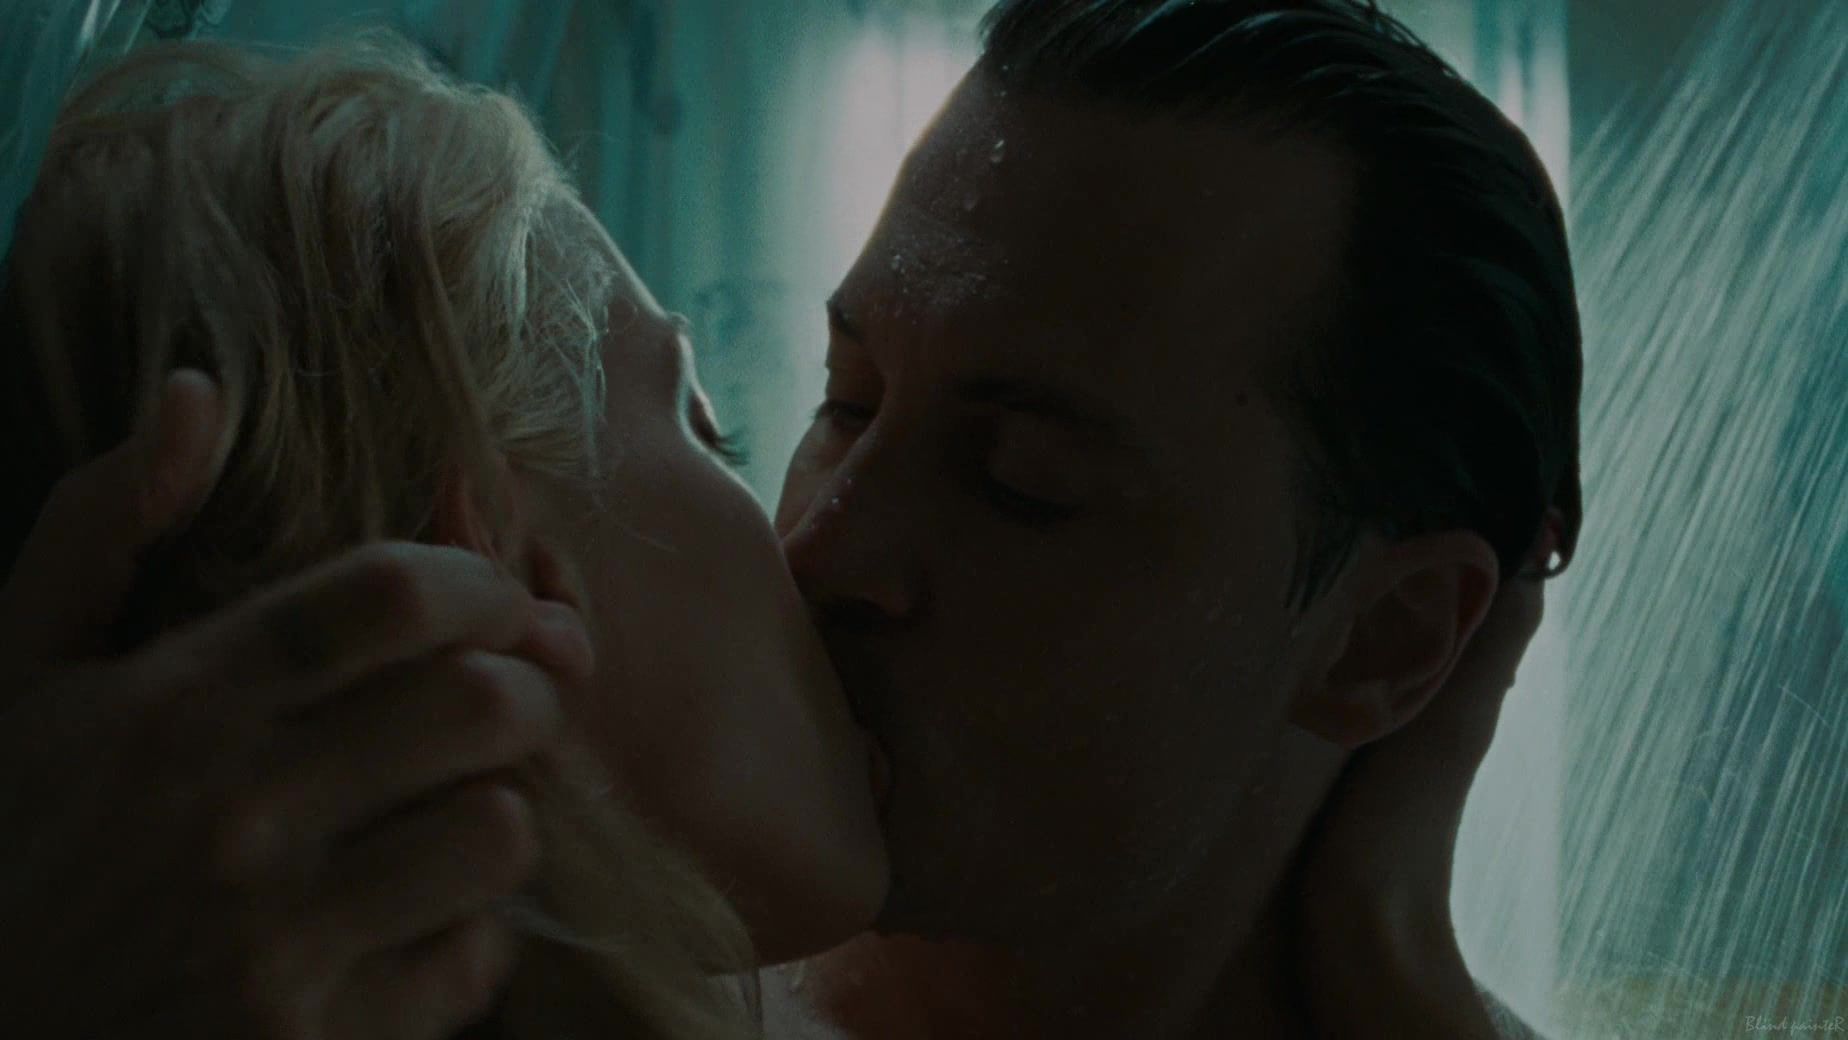 Coed Sex video Amber Heard nude - The Rum Diary (2011) Passionate